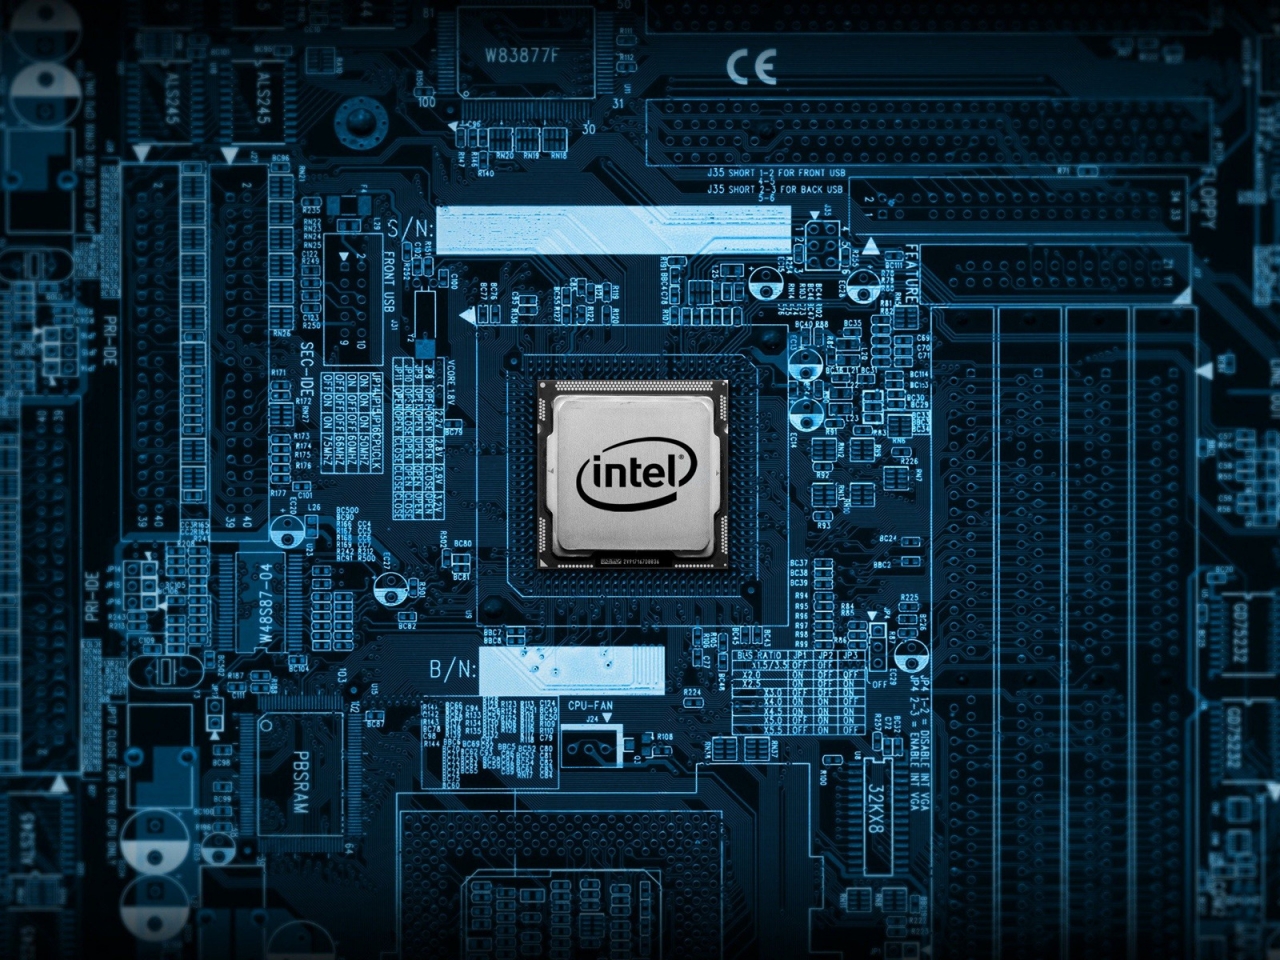 Intel CPU for 1280 x 960 resolution